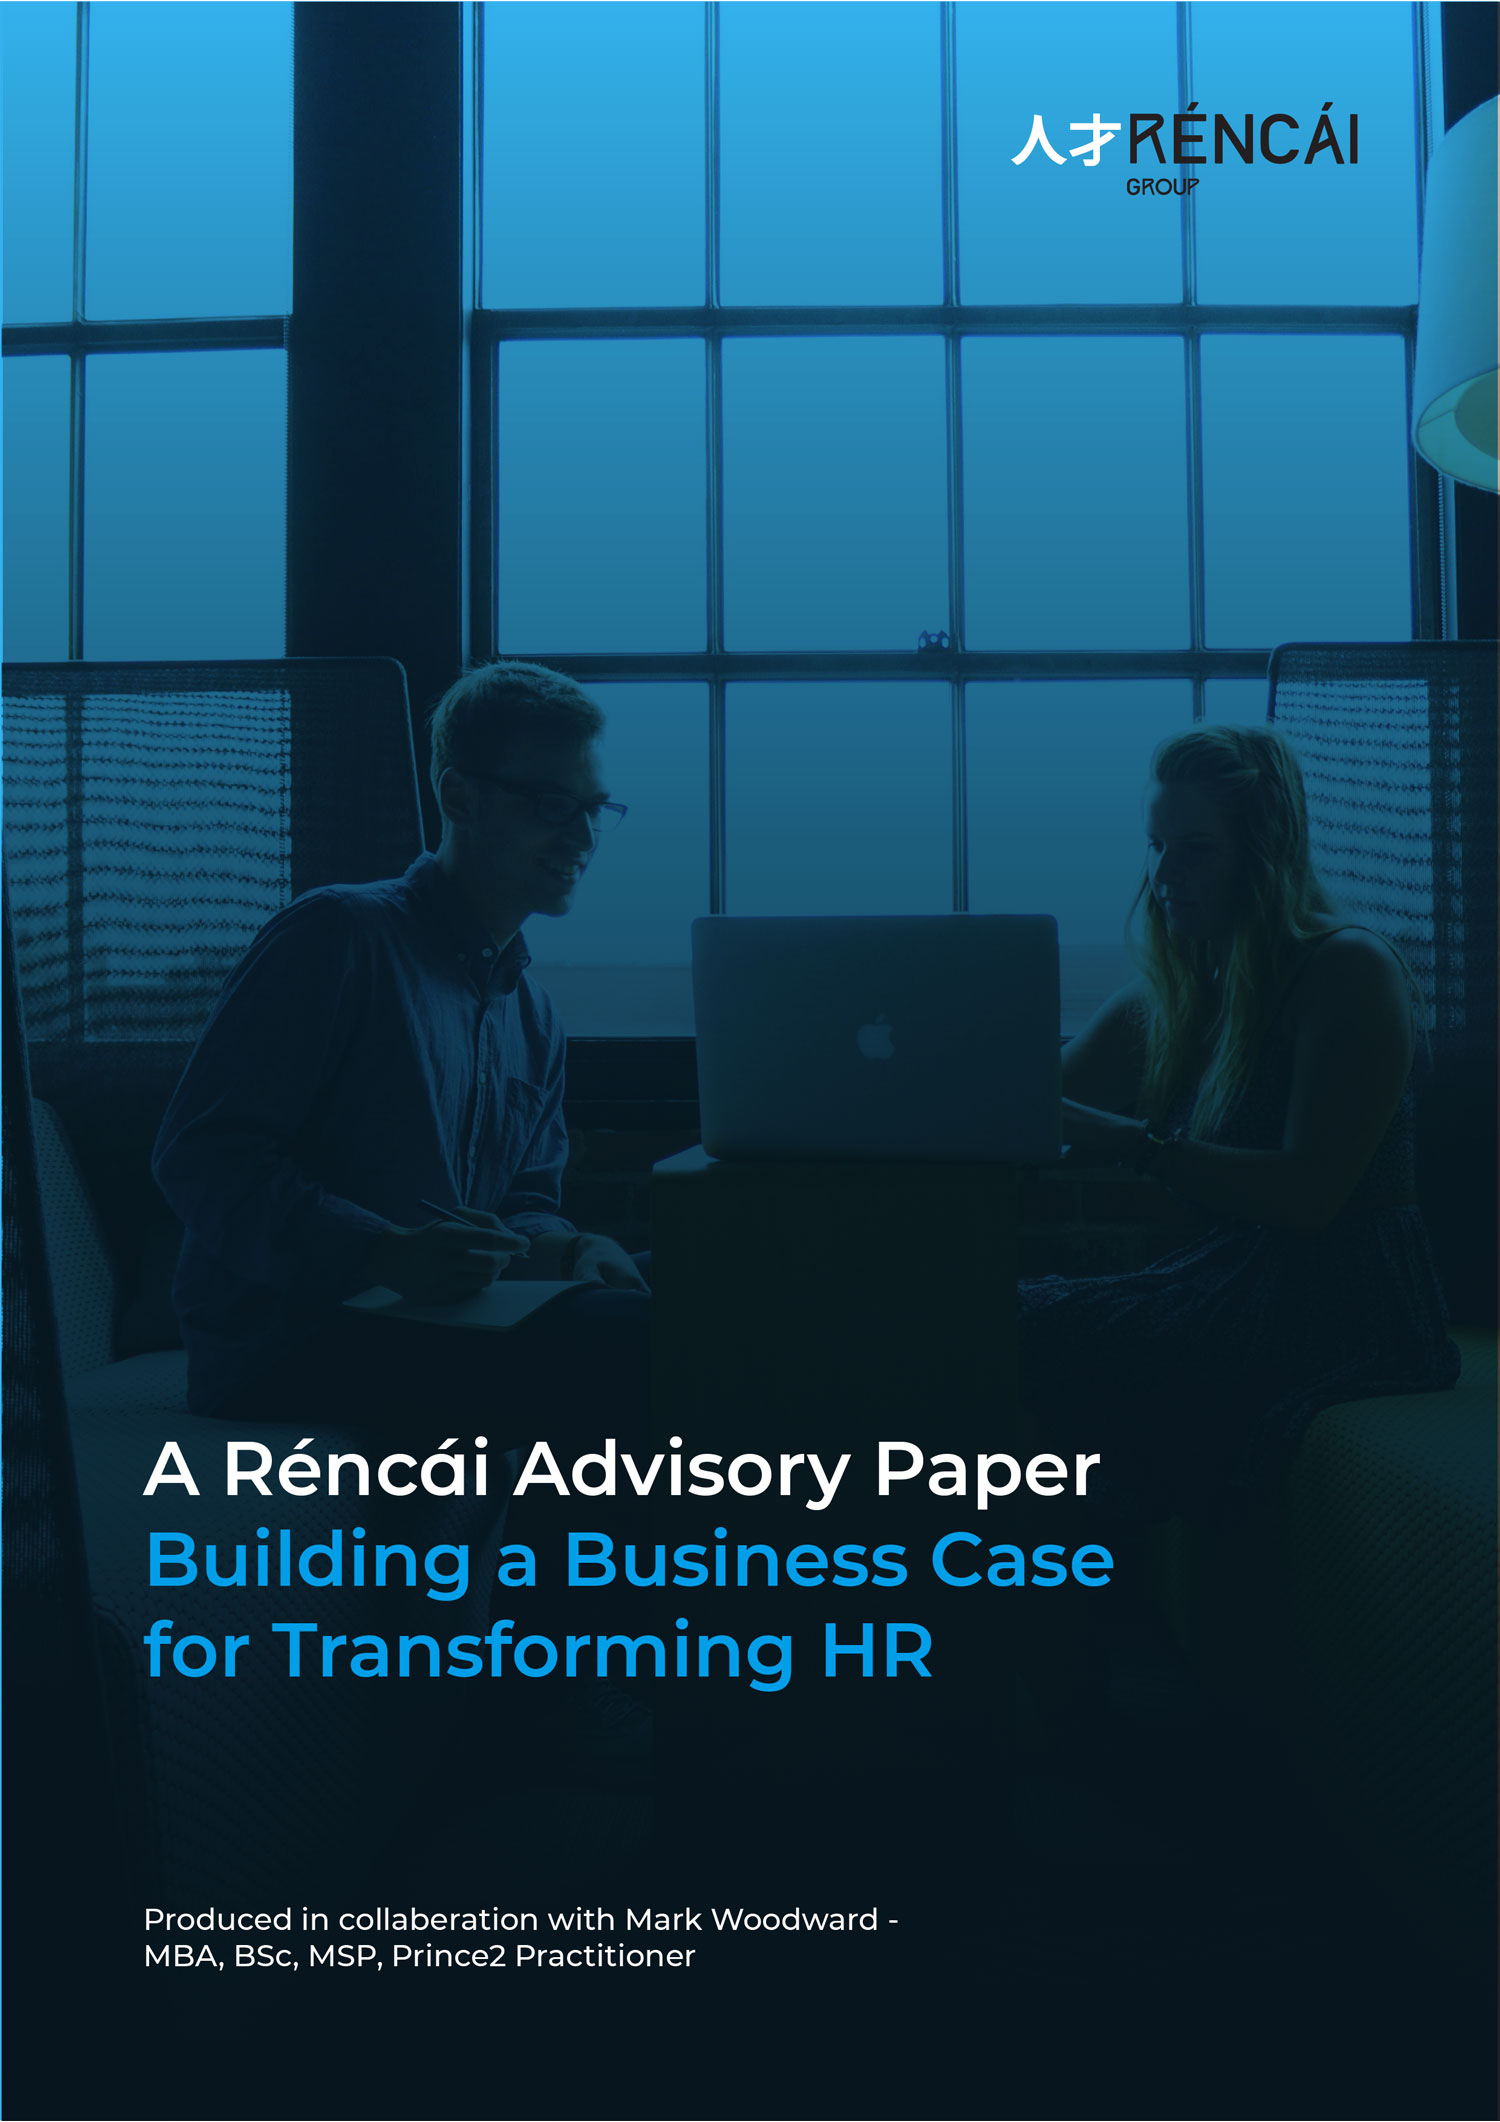 Rencai paper - business case for transforming HR